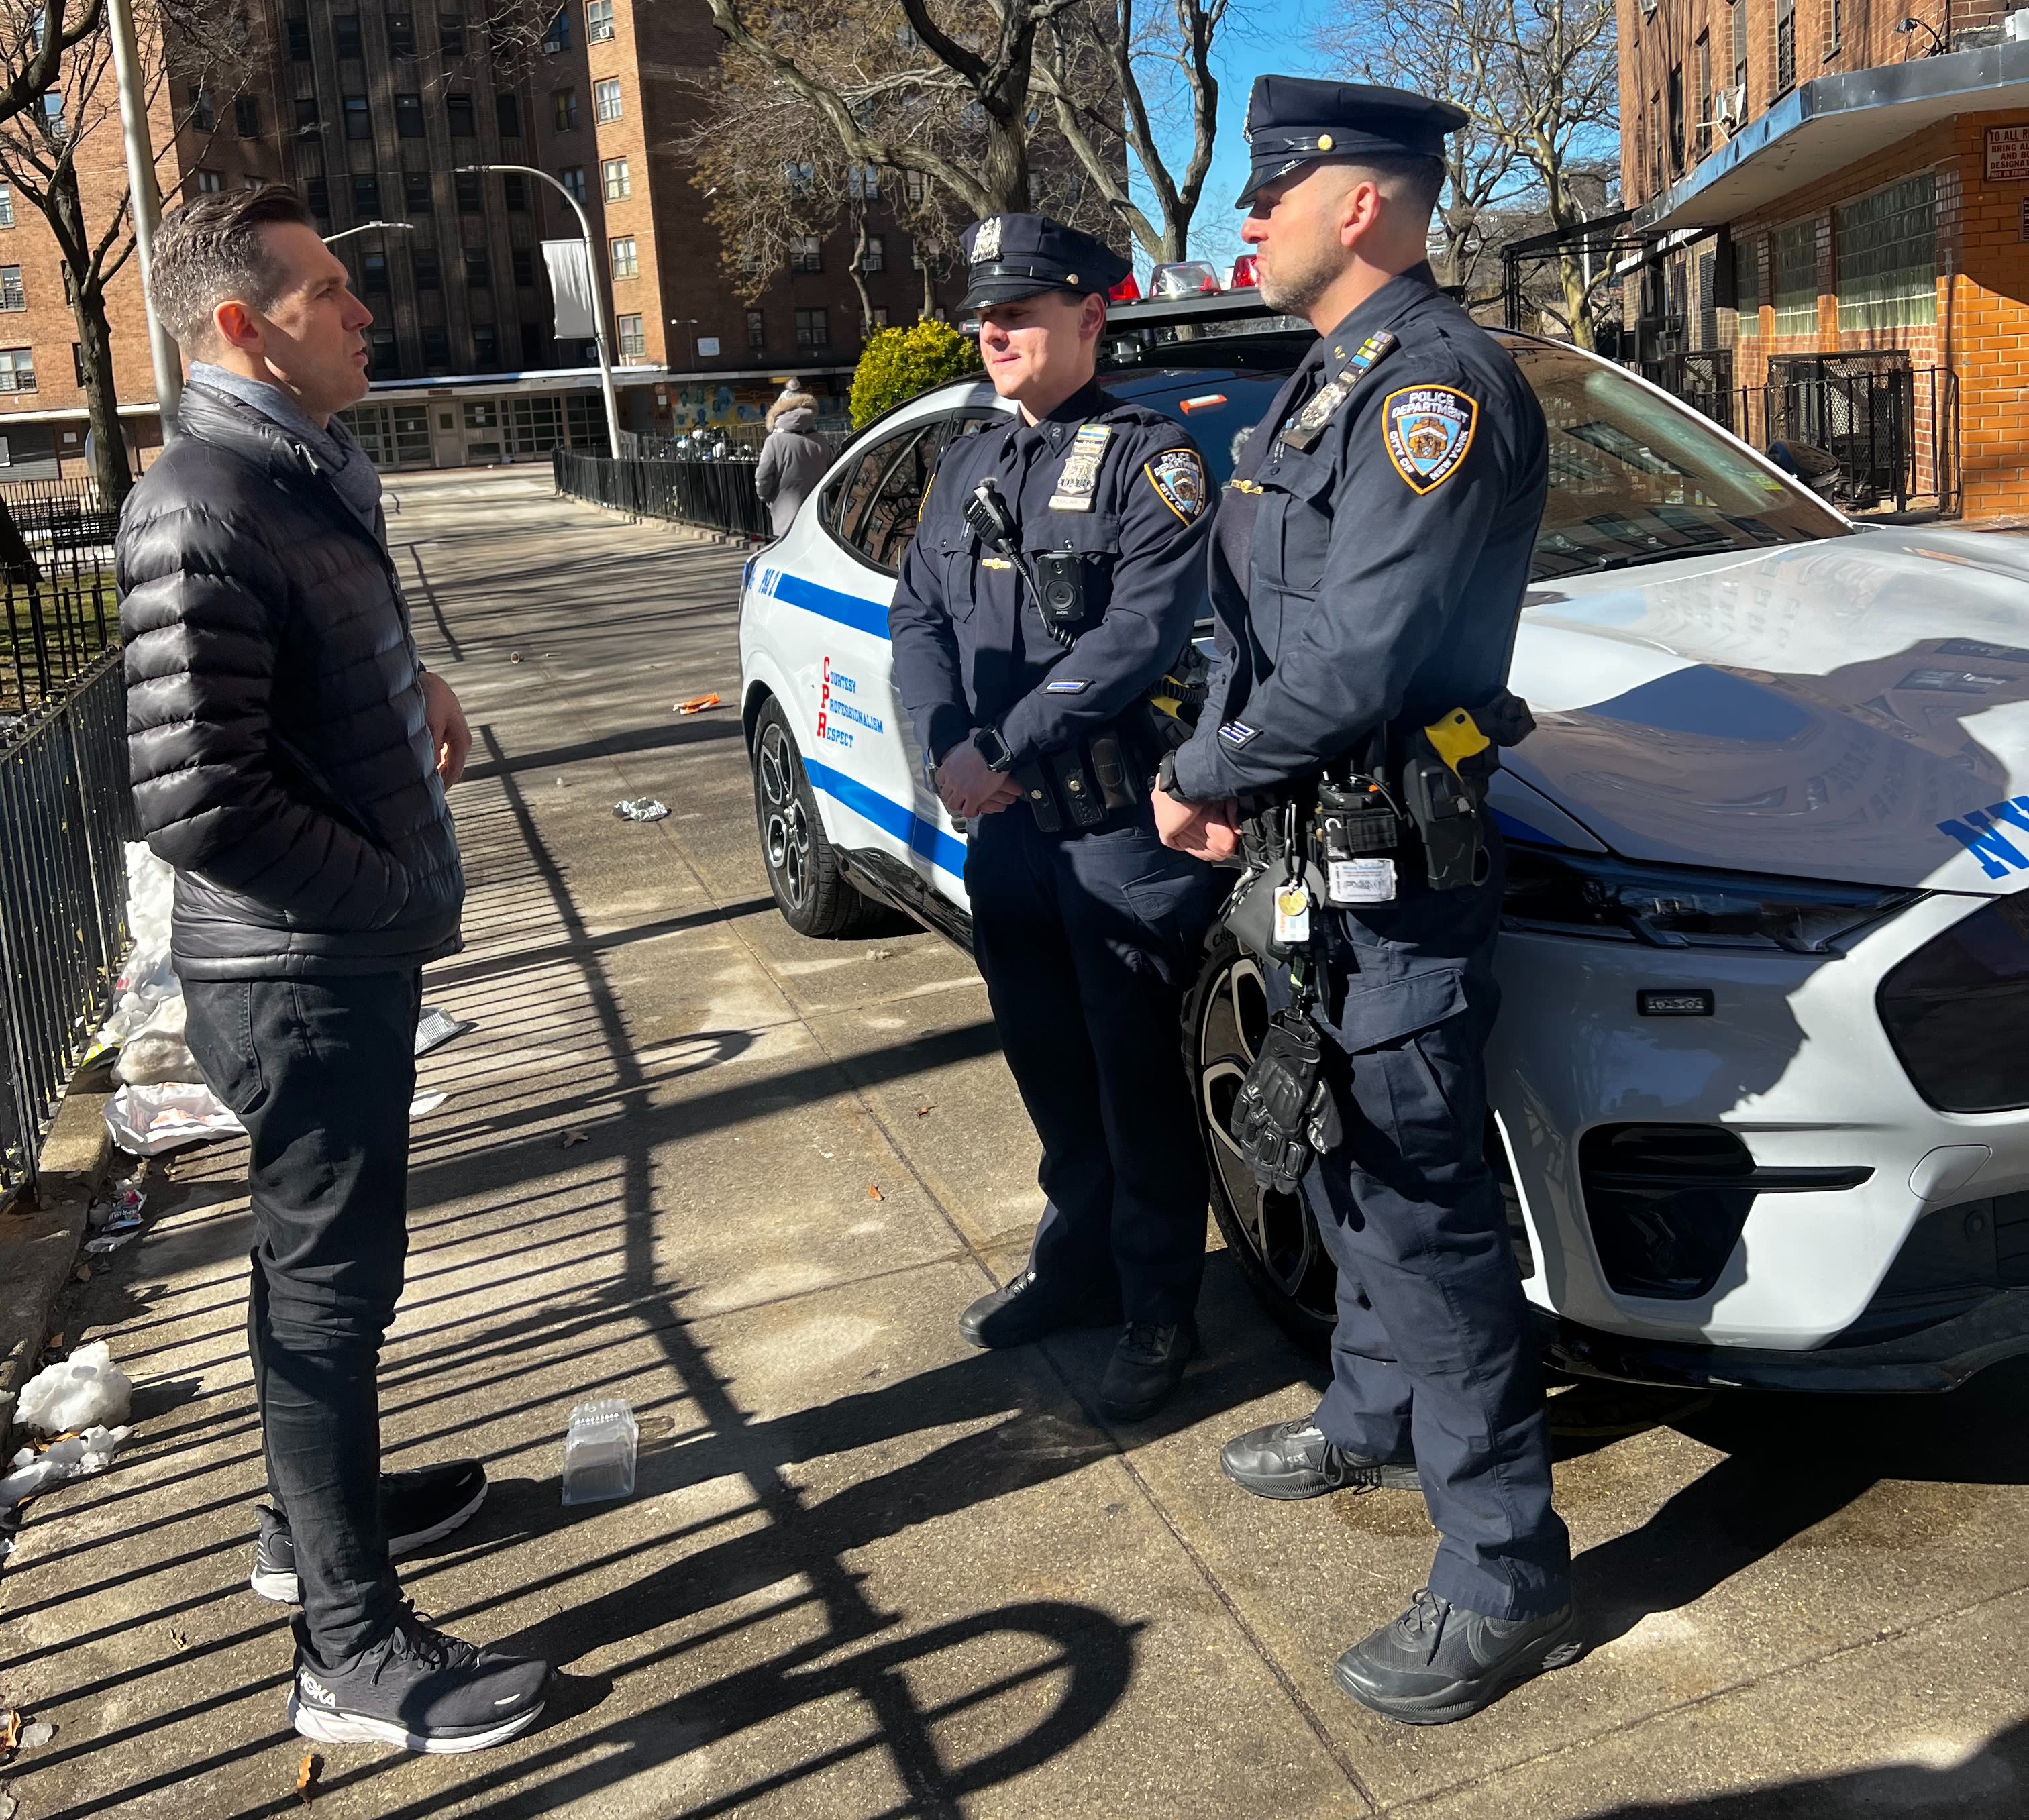 Officers Mark Kalwa and Rallo being interviewed by NBC New York.